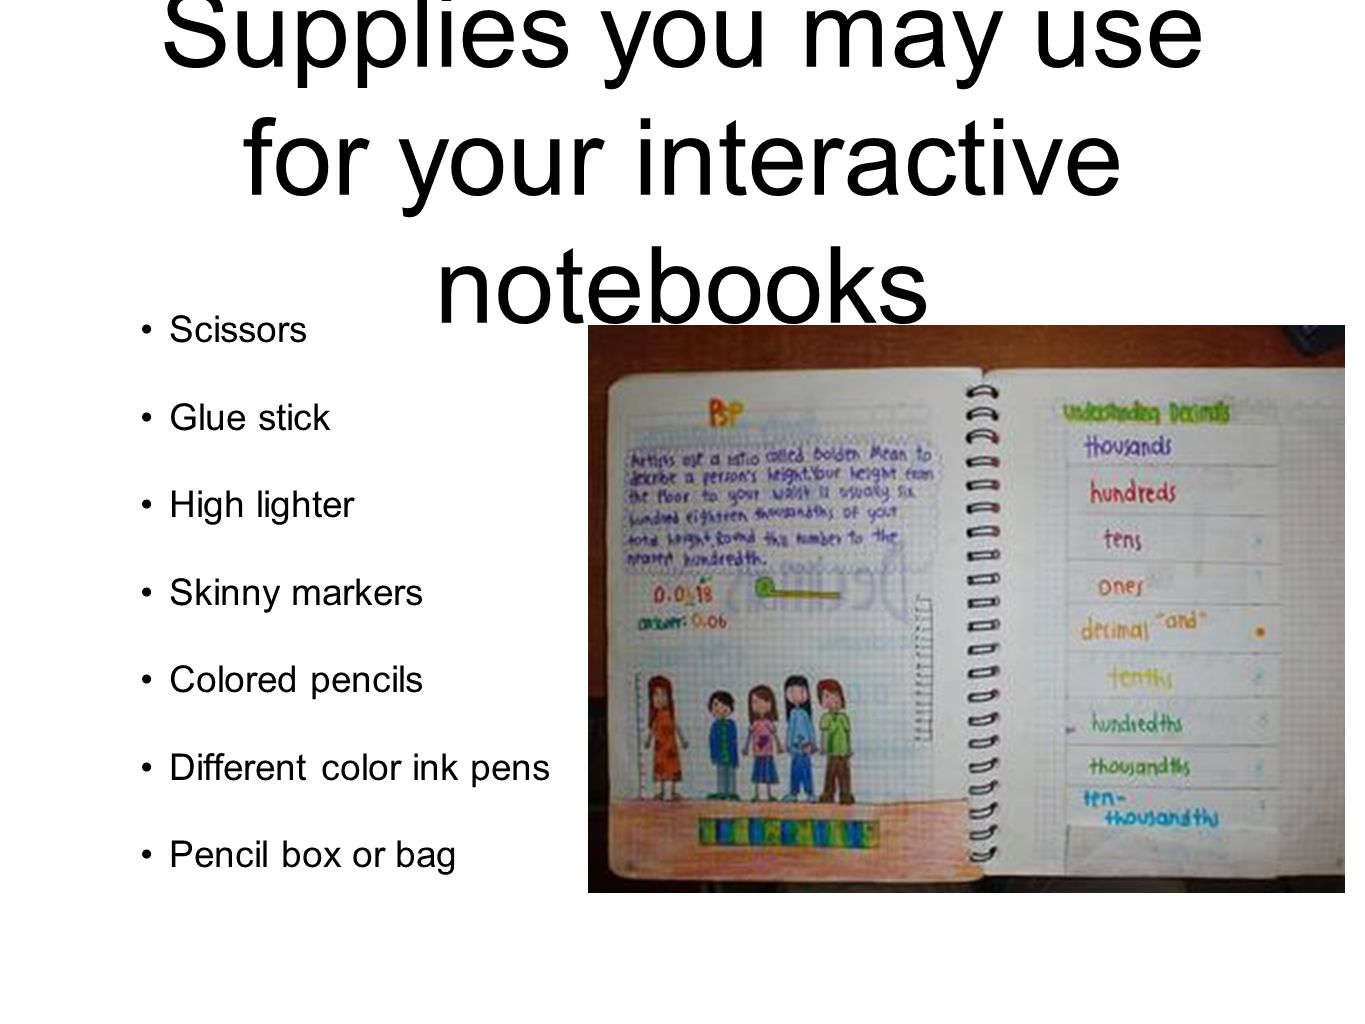 Supplies you may use for your interactive notebooks Scissors Glue stick High lighter Skinny markers Colored pencils Different color ink pens Pencil box or bag